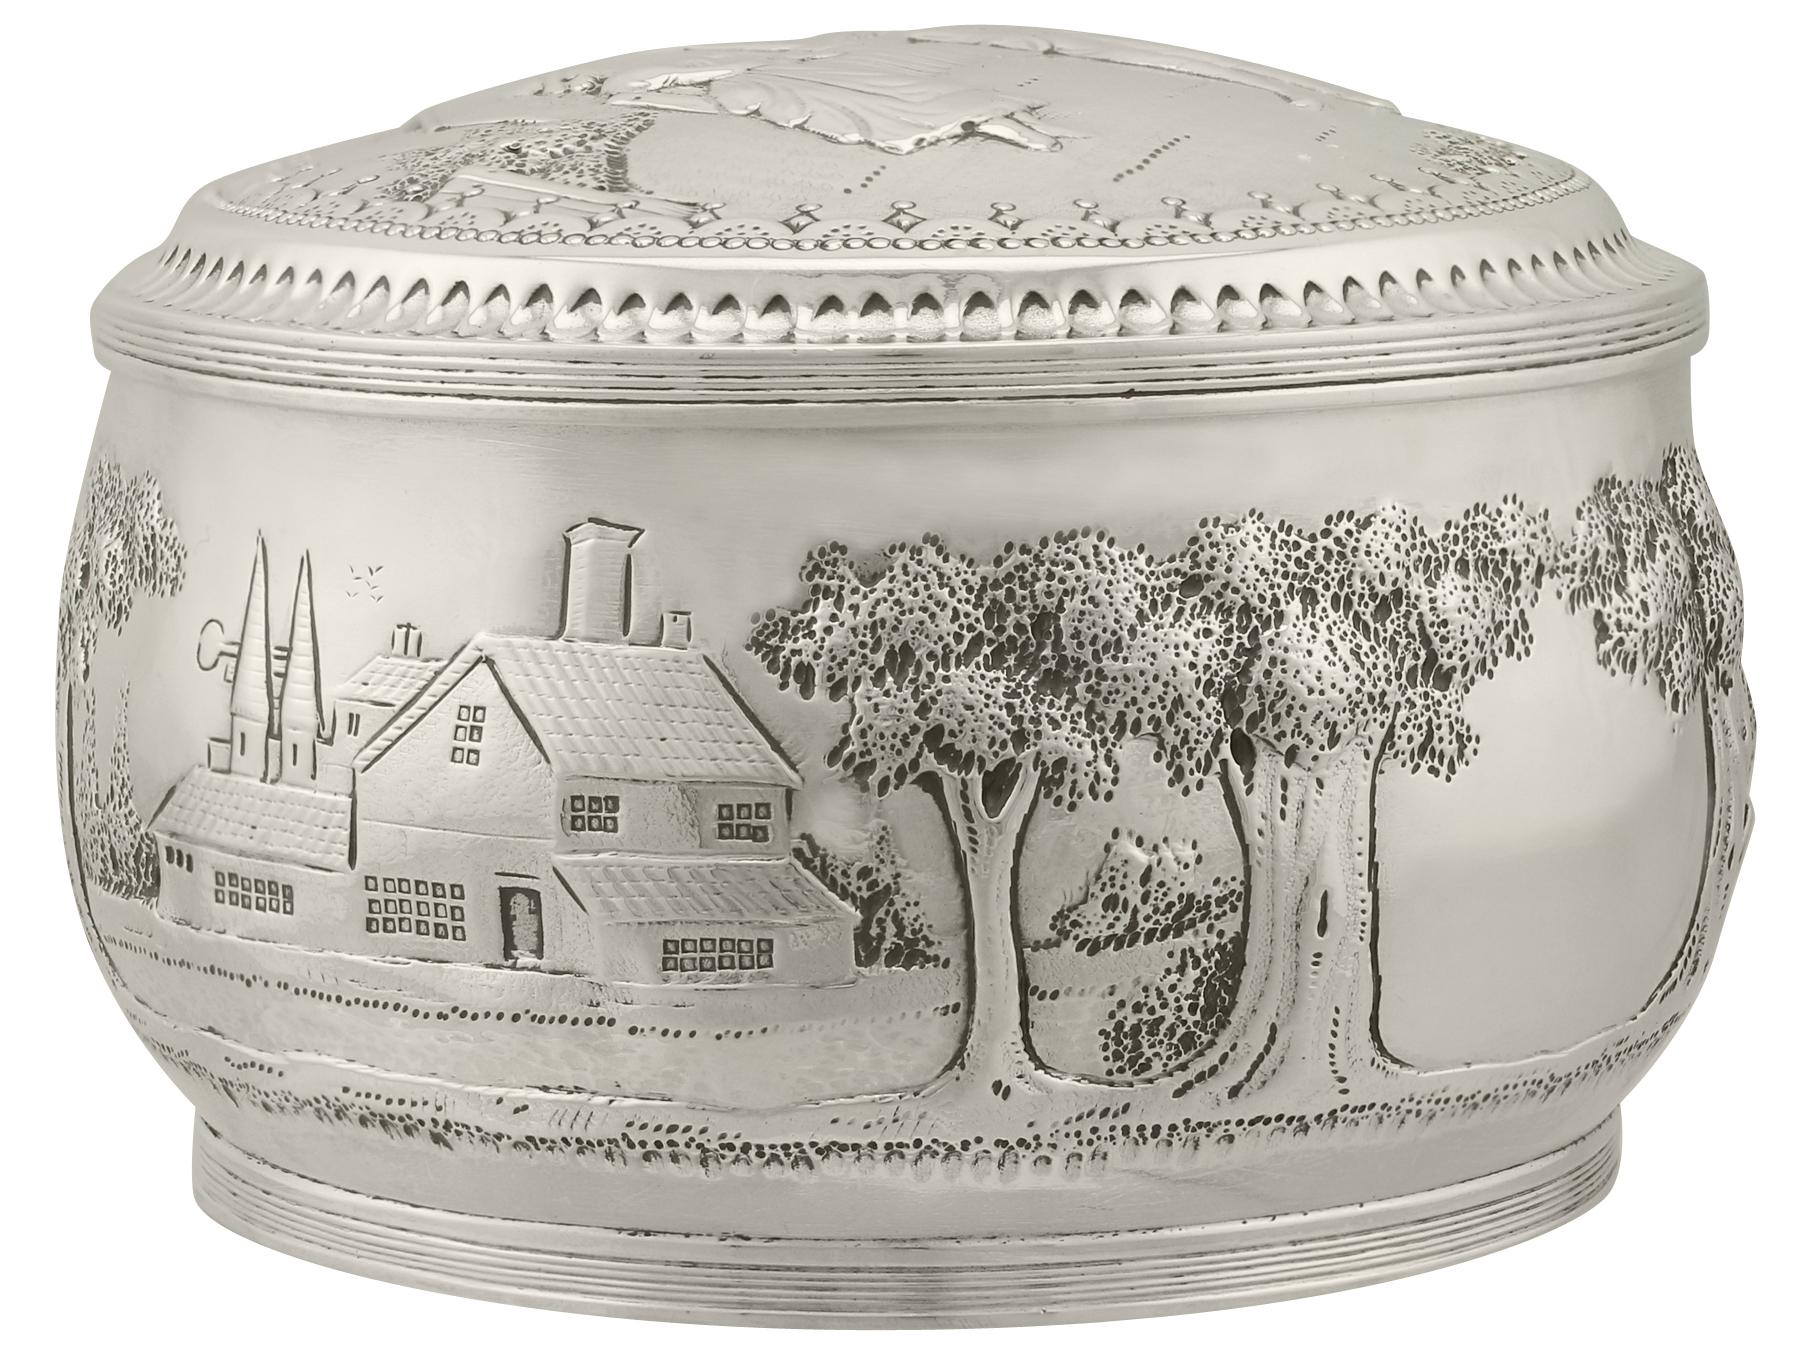 An exceptional, fine and impressive antique Dutch silver box, an addition to the ornamental silverware collection.

This exceptional antique Dutch silver box has circular rounded form.

The body of the box is embellished with embossed decoration